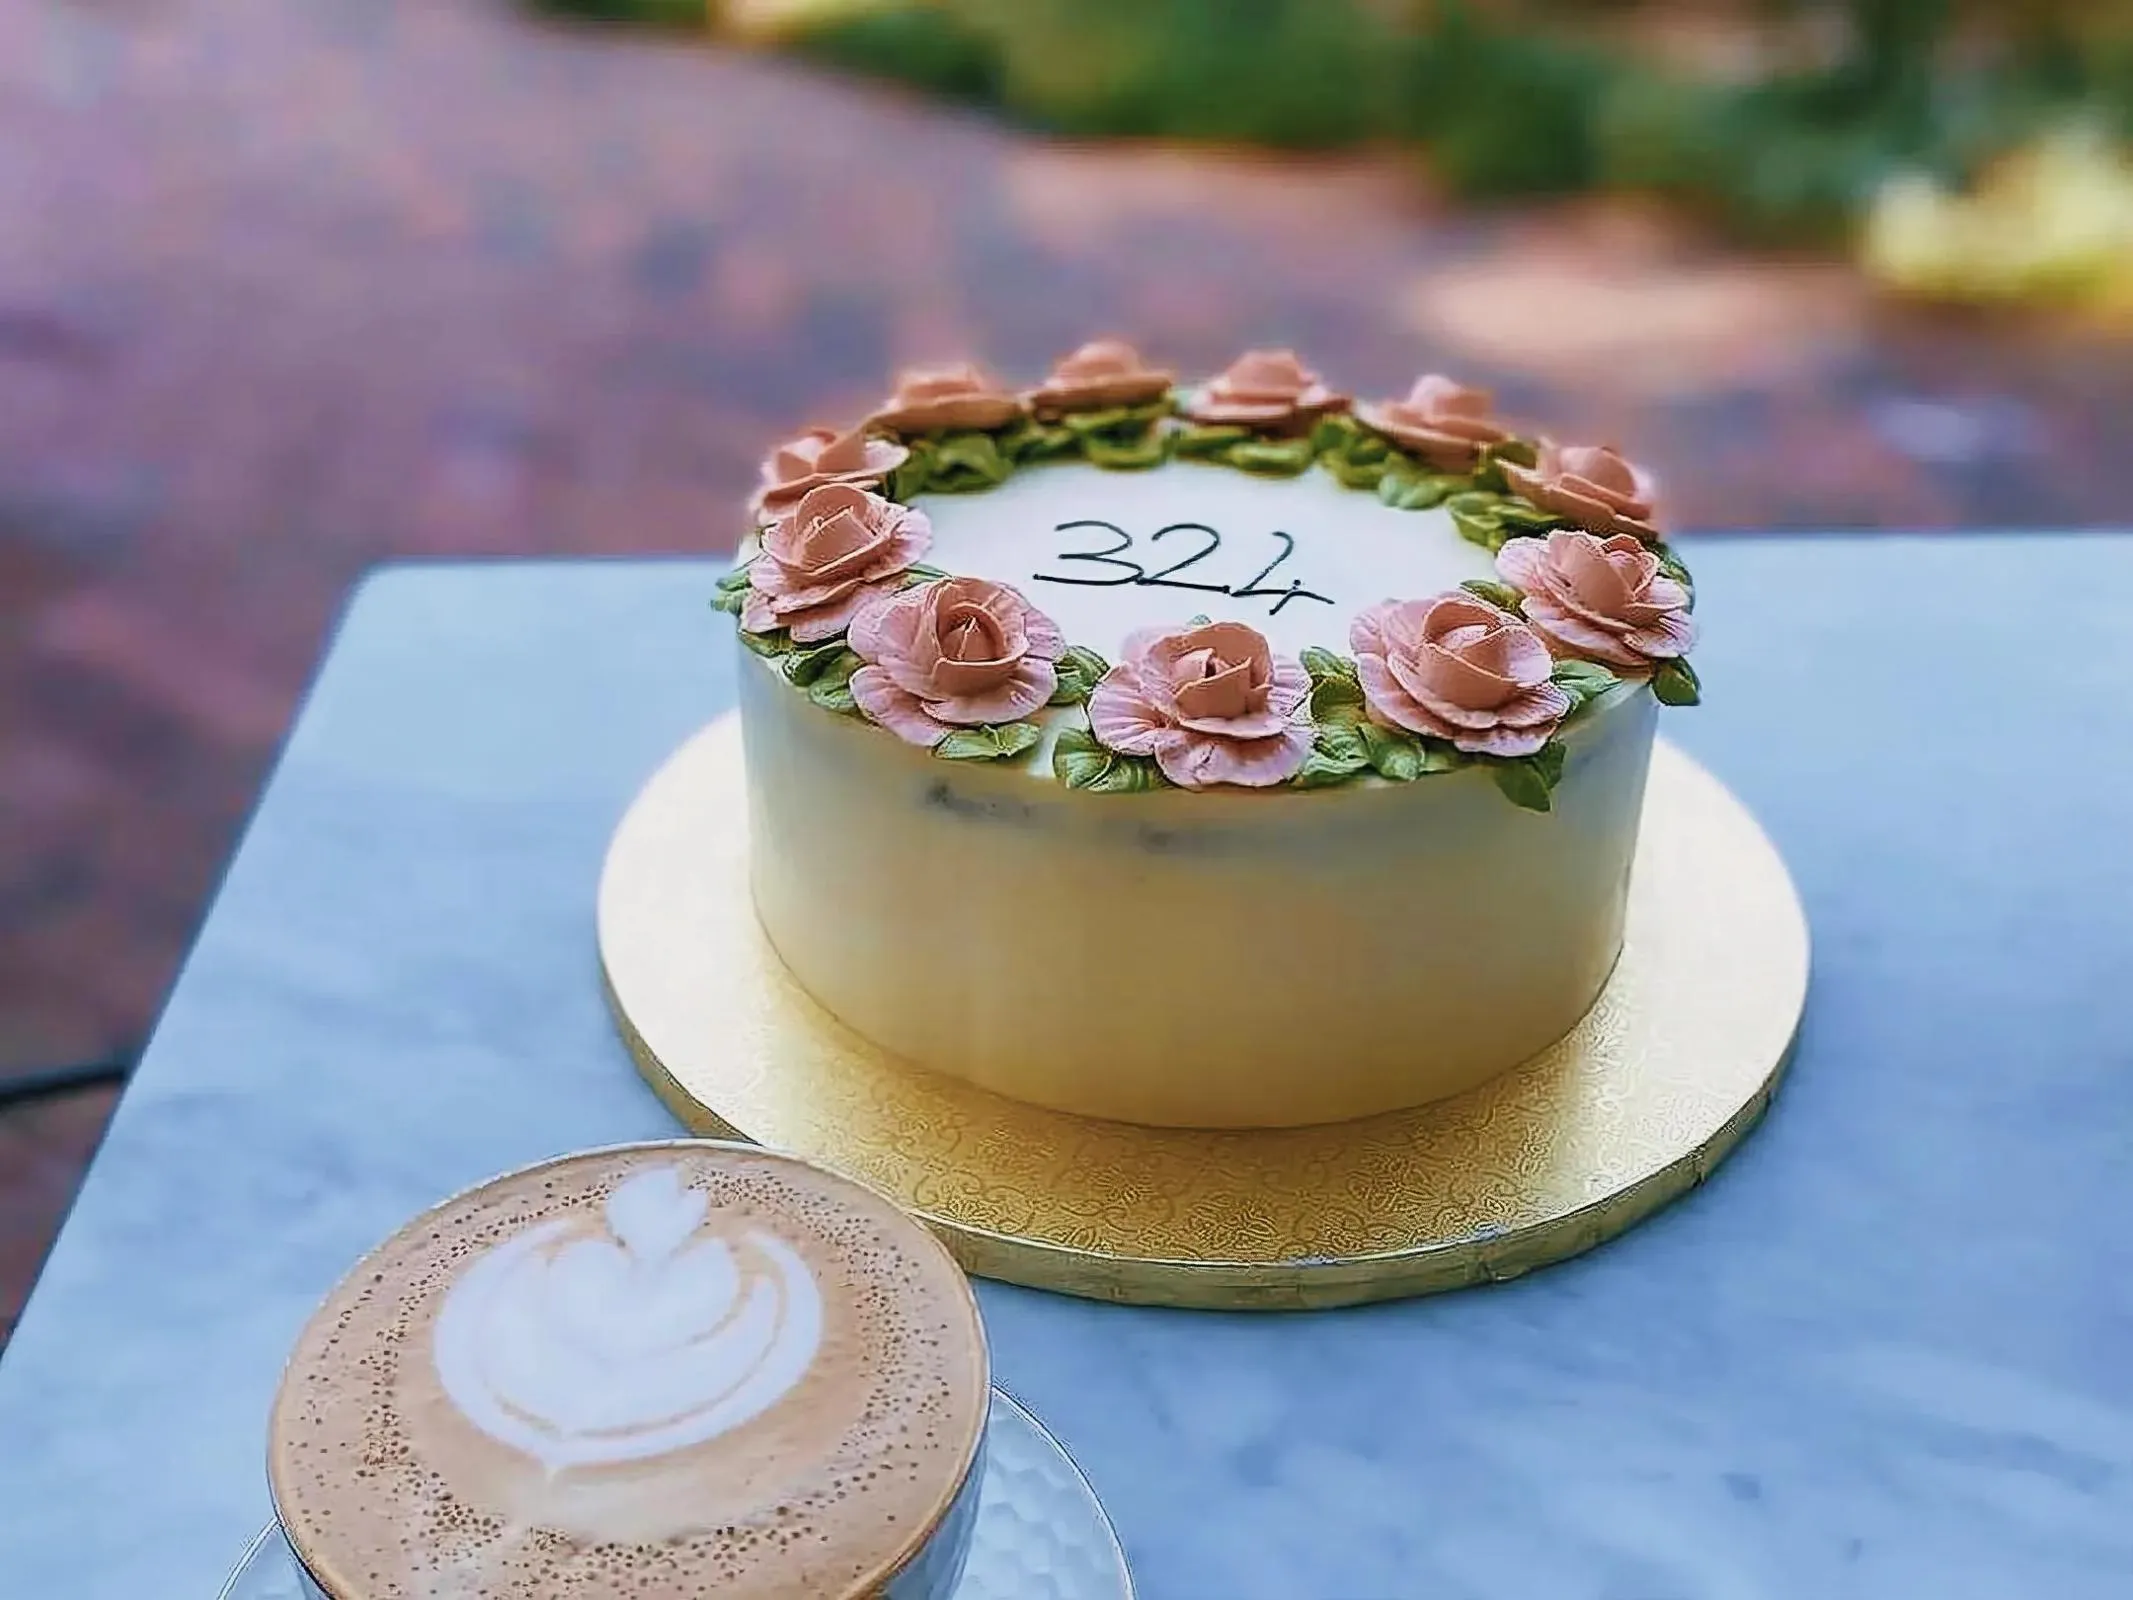 Beautifully decorated cake and latte with art on top